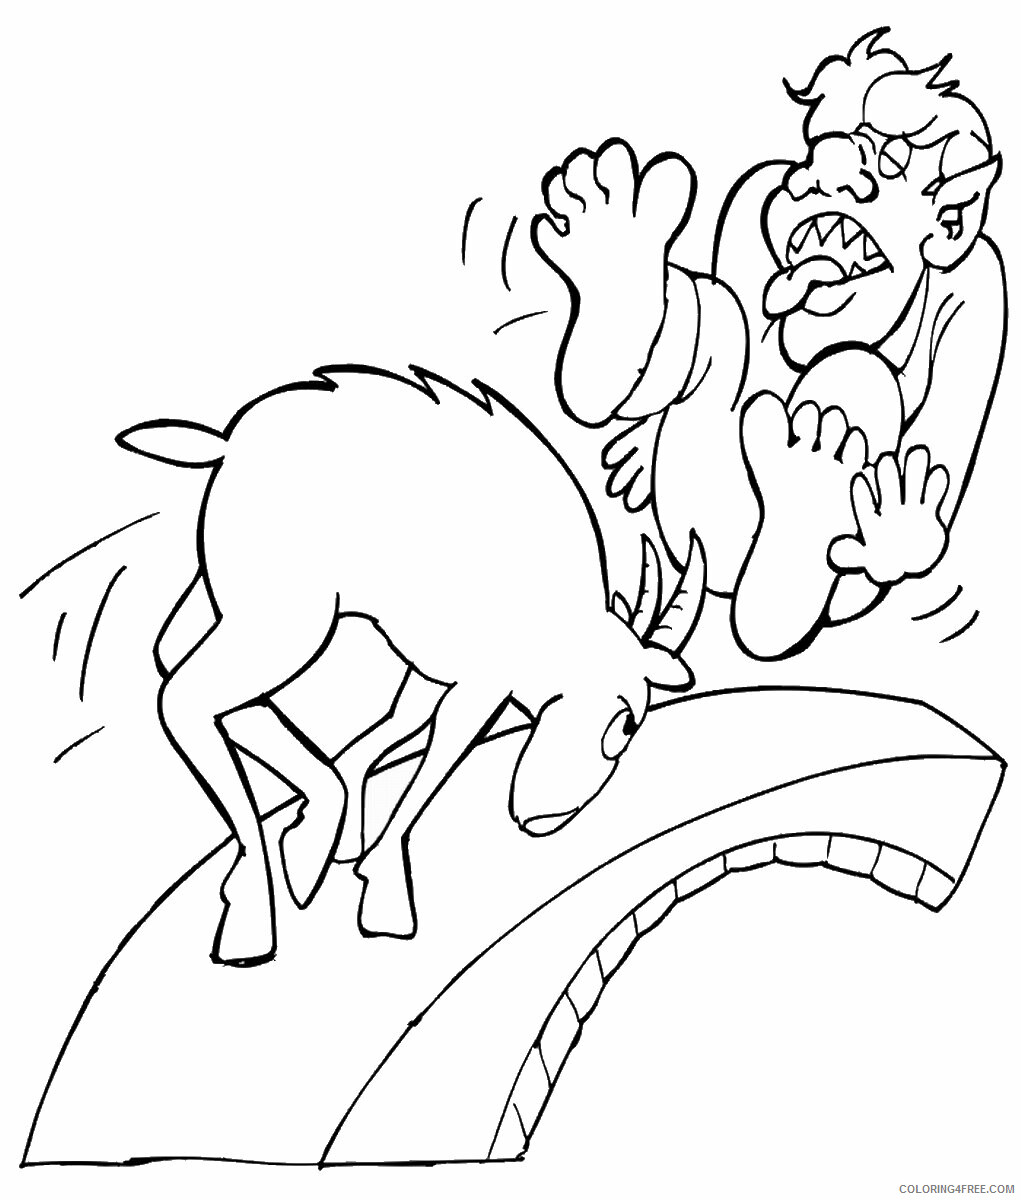 Goat Coloring Pages Animal Printable Sheets goat_cl_03 2021 2448 Coloring4free